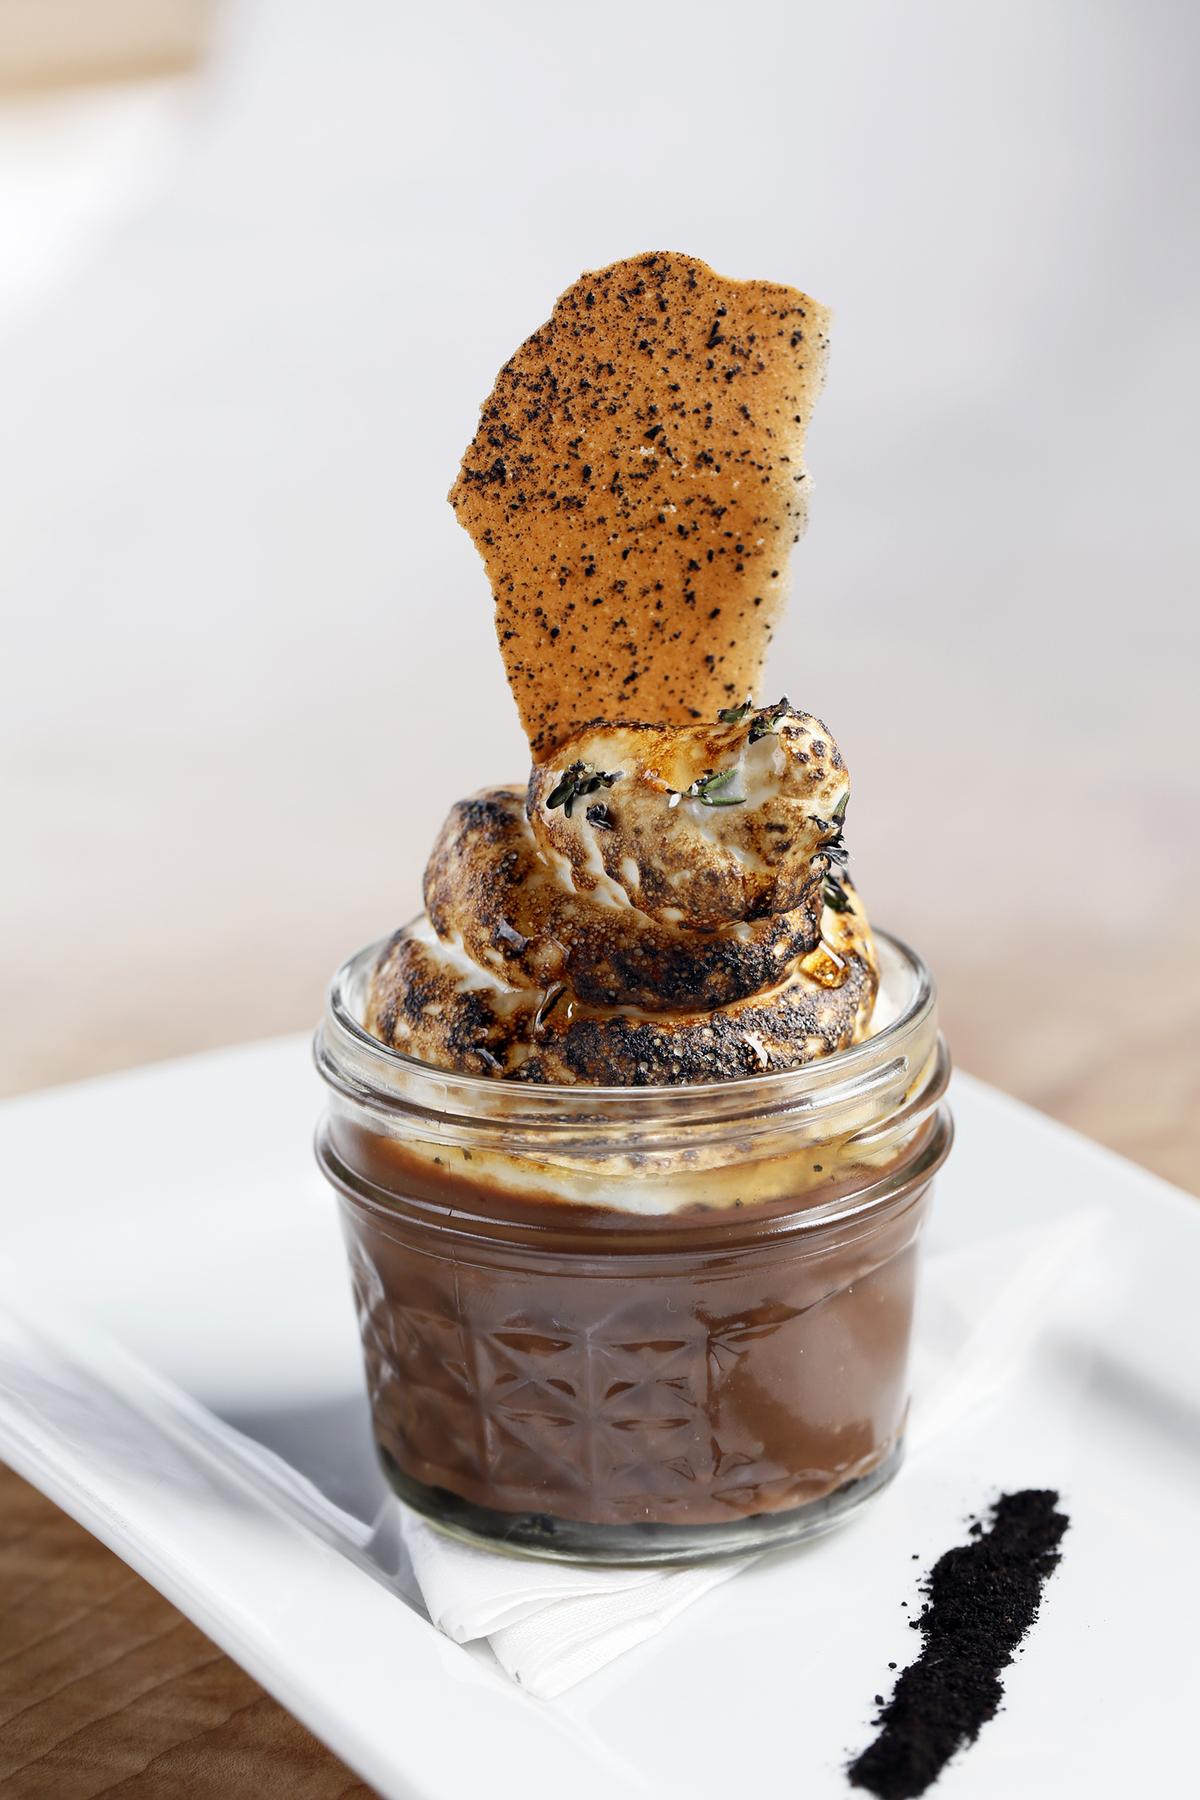 Tinker Street’s S’more Pot de Crème with marshmallow and hickory ash. (Courtesy of Tinker Street)